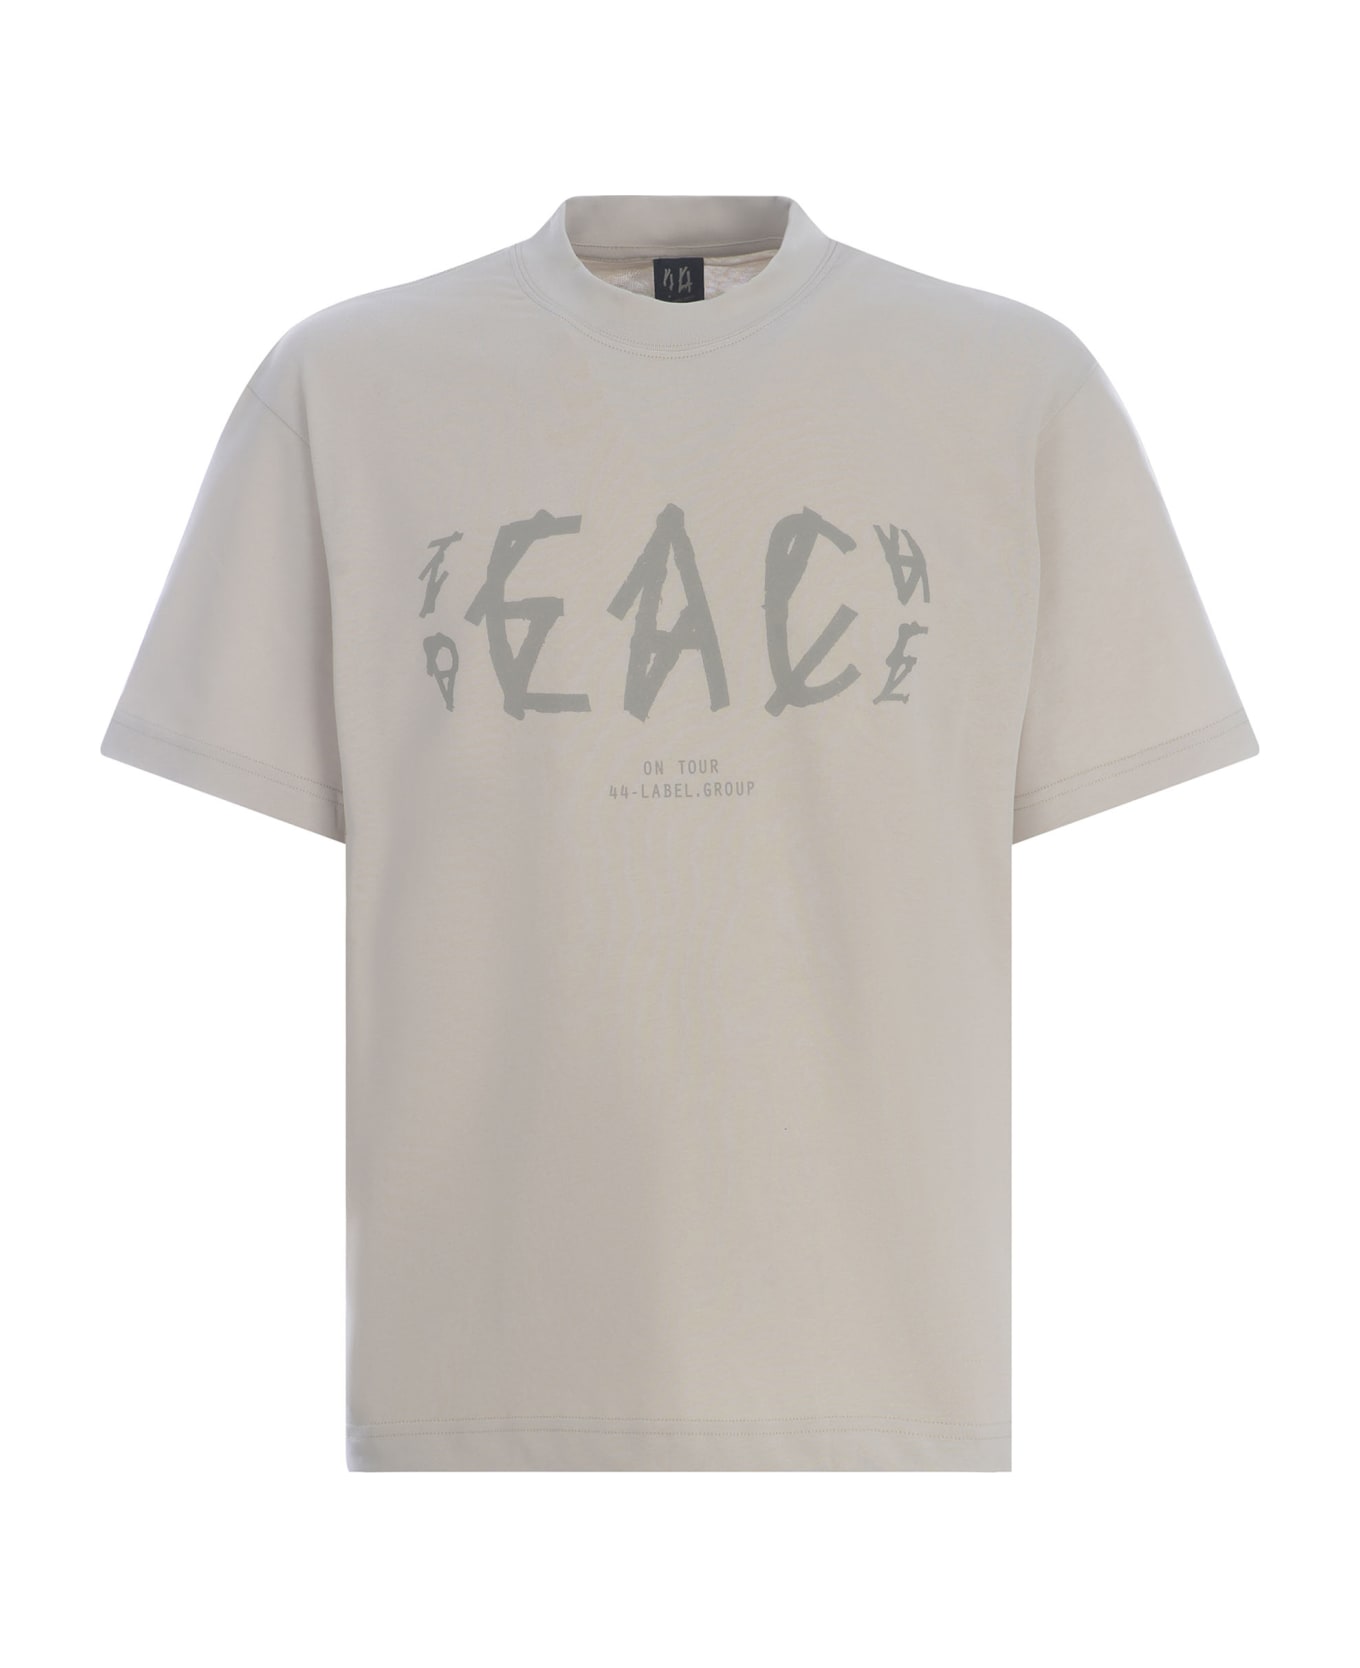 44 Label Group T-shirt 44 Label Group "peace" Made Of Cotton - Crema シャツ